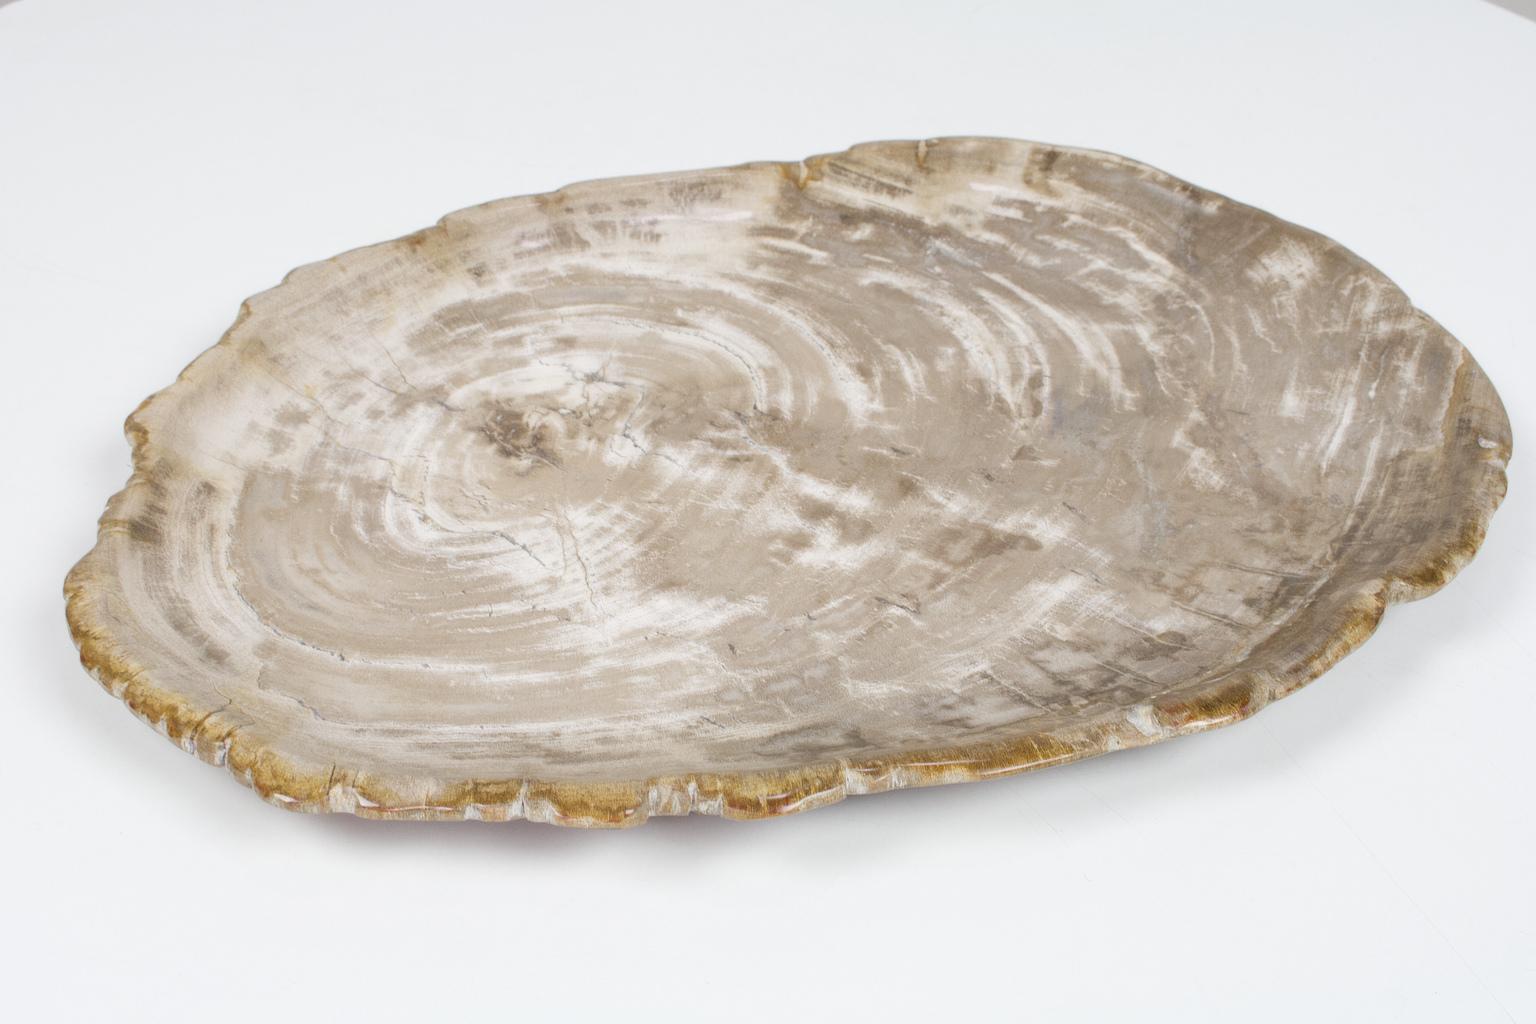 Large petrified wooden plate (or platter) in light colors, smooth sanded and polished on both sides. This organically shaped and ancient object is an unique piece in any home. The beige and off white tones of this plate make this an elegant